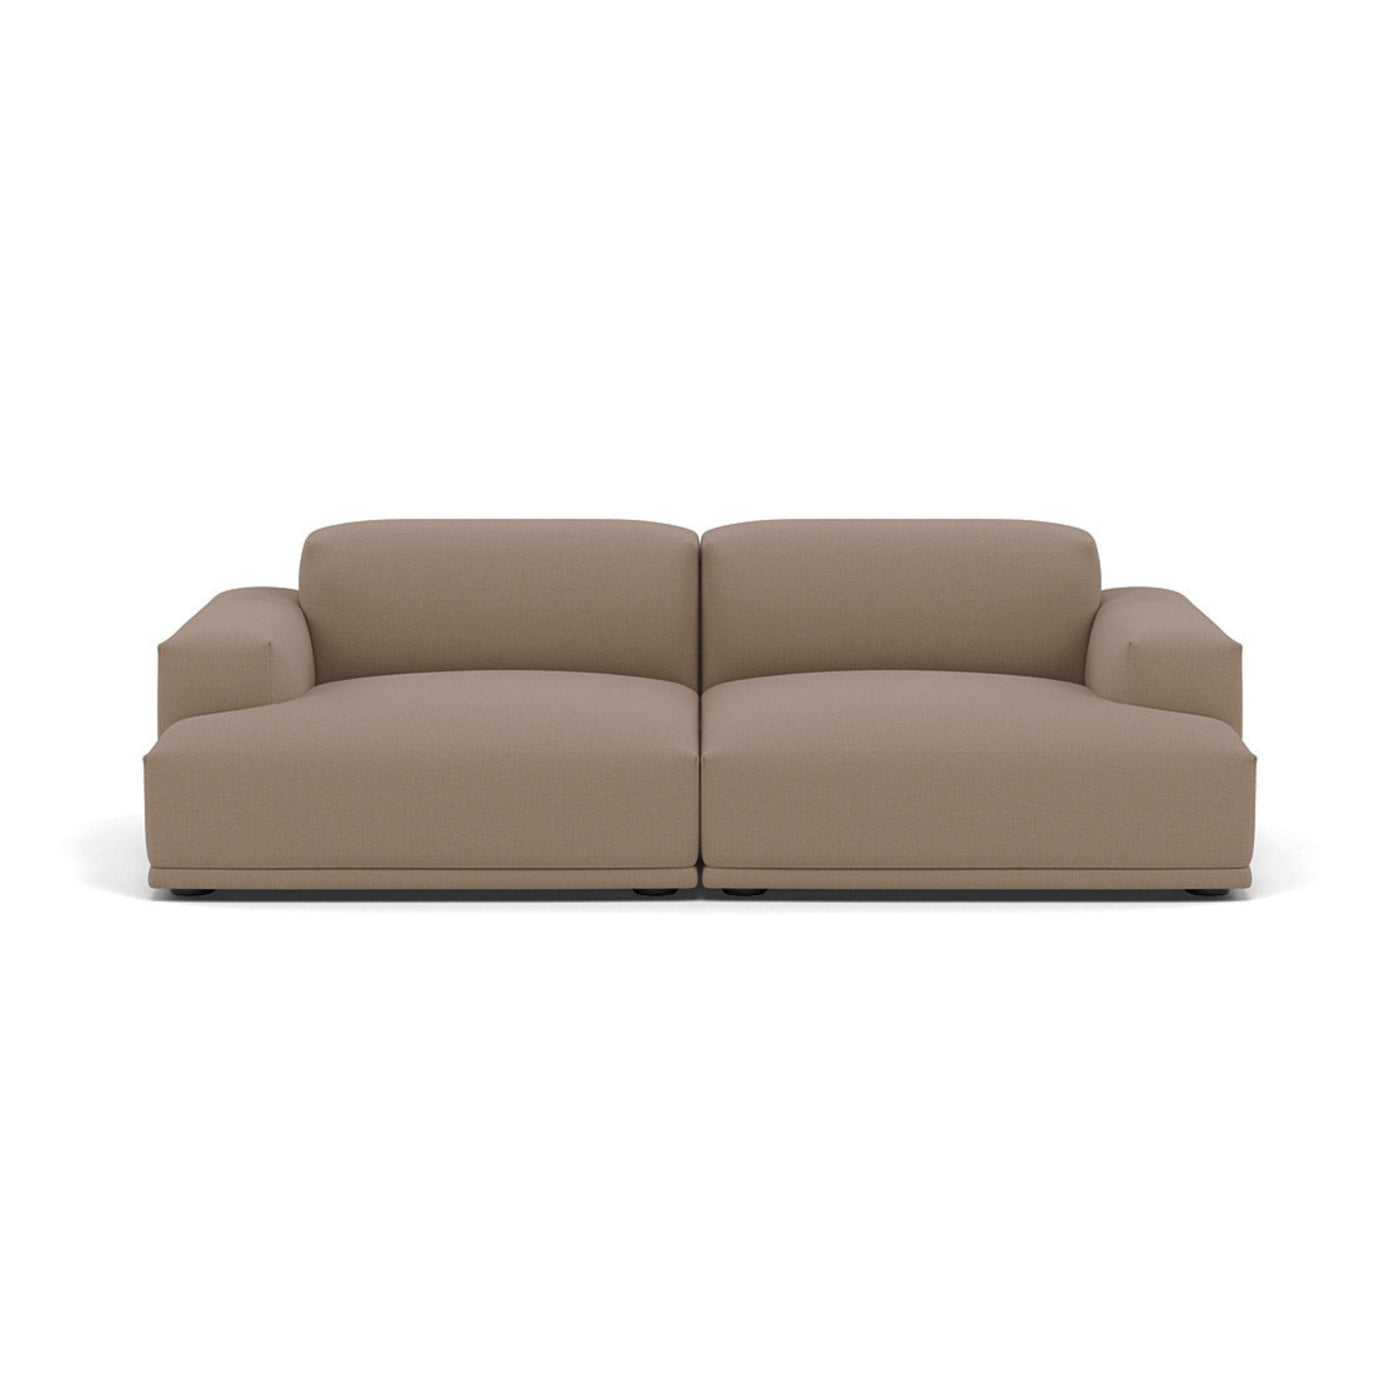 Muuto Connect Sofa 2 seater. Available made to order from someday designs. #colour_steelcut-trio-426